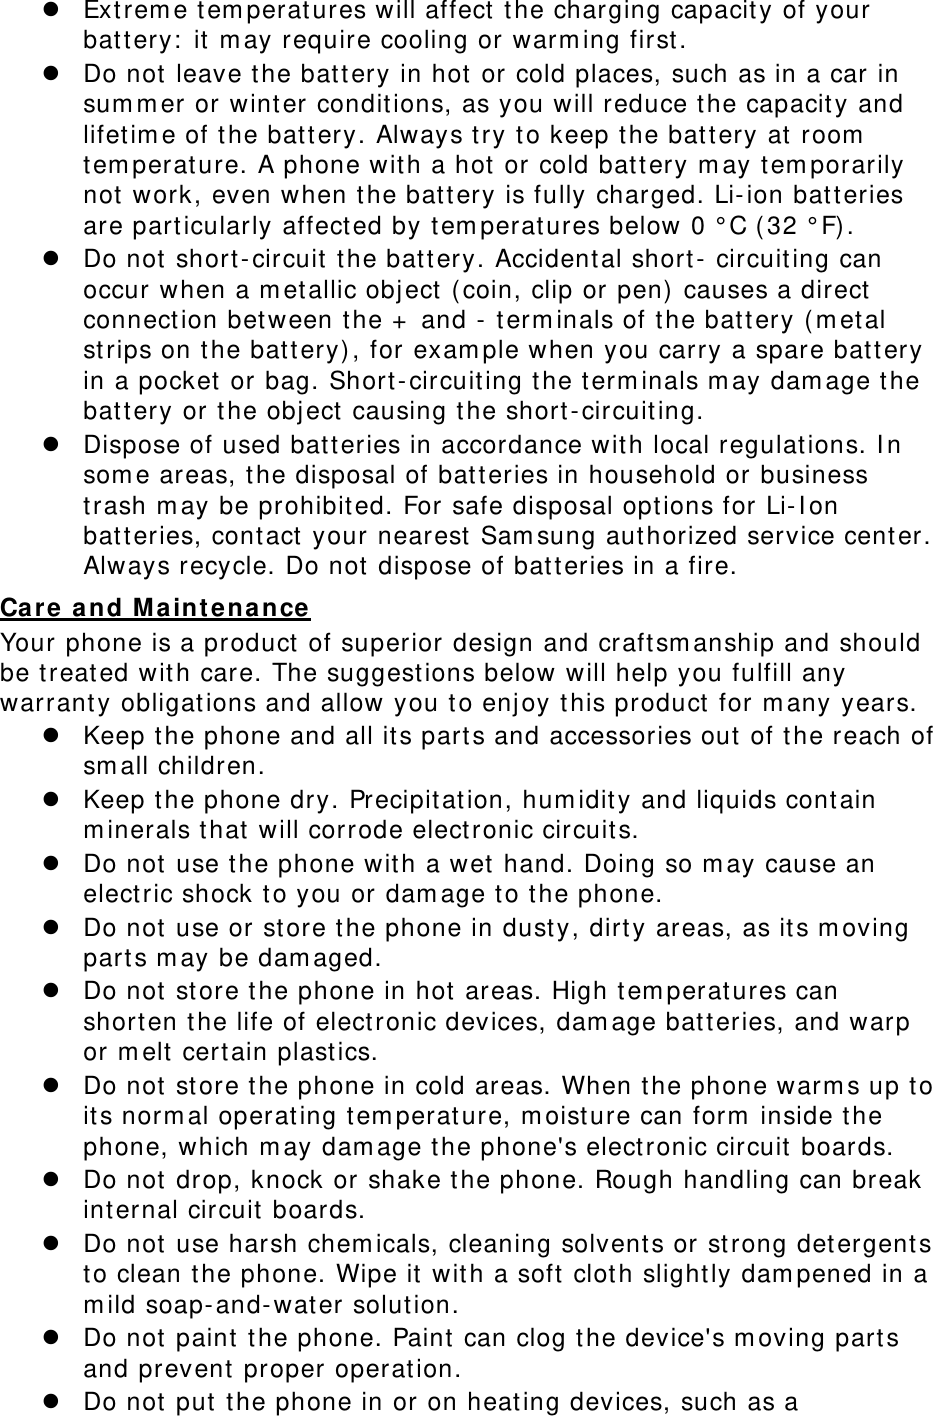  Ext rem e t em perat ures will affect t he charging capacit y of your bat t ery:  it  m ay require cooling or warm ing first .  Do not leave the bat t ery in hot  or cold places, such as in a car in sum m er or wint er condit ions, as you will reduce t he capacit y and lifet im e of t he bat t ery. Always t ry t o keep the batt ery at room  tem perat ure. A phone with a hot  or cold batt ery m ay t em porarily not  work, even when t he bat t ery is fully charged. Li- ion bat t eries are particularly affect ed by t em perat ures below 0 ° C ( 32 ° F).  Do not short- circuit  t he bat t ery. Accident al short-  circuit ing can occur when a m et allic obj ect  (coin, clip or pen)  causes a direct  connect ion between t he +  and -  t erm inals of the bat t ery ( m et al strips on the batt ery), for exam ple when you carry a spare bat t ery in a pocket  or bag. Short - circuit ing the t erm inals m ay dam age t he bat t ery or t he obj ect causing t he short -circuit ing.  Dispose of used bat t eries in accordance wit h local regulat ions. I n som e areas, the disposal of bat t eries in household or business trash m ay be prohibit ed. For safe disposal opt ions for Li- I on bat t eries, cont act your nearest Sam sung authorized service cent er. Always recycle. Do not  dispose of bat teries in a fire. Care  a n d M aint enance  Your phone is a product  of superior design and craftsm anship and should be t reat ed wit h care. The suggestions below will help you fulfill any warranty obligations and allow you t o enj oy t his product  for m any years.  Keep t he phone and all it s parts and accessories out  of t he reach of sm all children.  Keep t he phone dry. Precipit at ion, hum idity and liquids cont ain m inerals t hat  will corrode elect ronic circuit s.  Do not use t he phone wit h a wet hand. Doing so m ay cause an elect ric shock t o you or dam age t o t he phone.  Do not use or st ore t he phone in dust y, dirt y areas, as it s m oving part s m ay be dam aged.  Do not st ore the phone in hot  areas. High t em perat ures can shorten t he life of electronic devices, dam age bat t eries, and warp or m elt  certain plast ics.  Do not st ore the phone in cold areas. When t he phone warm s up to it s norm al operating t em perat ure, m oisture can form  inside t he phone, which m ay dam age the phone&apos;s electronic circuit boards.  Do not drop, knock or shake t he phone. Rough handling can break int ernal circuit  boards.  Do not use harsh chem icals, cleaning solvents or strong det ergent s to clean t he phone. Wipe it  wit h a soft clot h slightly dam pened in a m ild soap- and- wat er solution.  Do not paint t he phone. Paint can clog the device&apos;s m oving parts and prevent proper operat ion.  Do not put t he phone in or on heating devices, such as a 